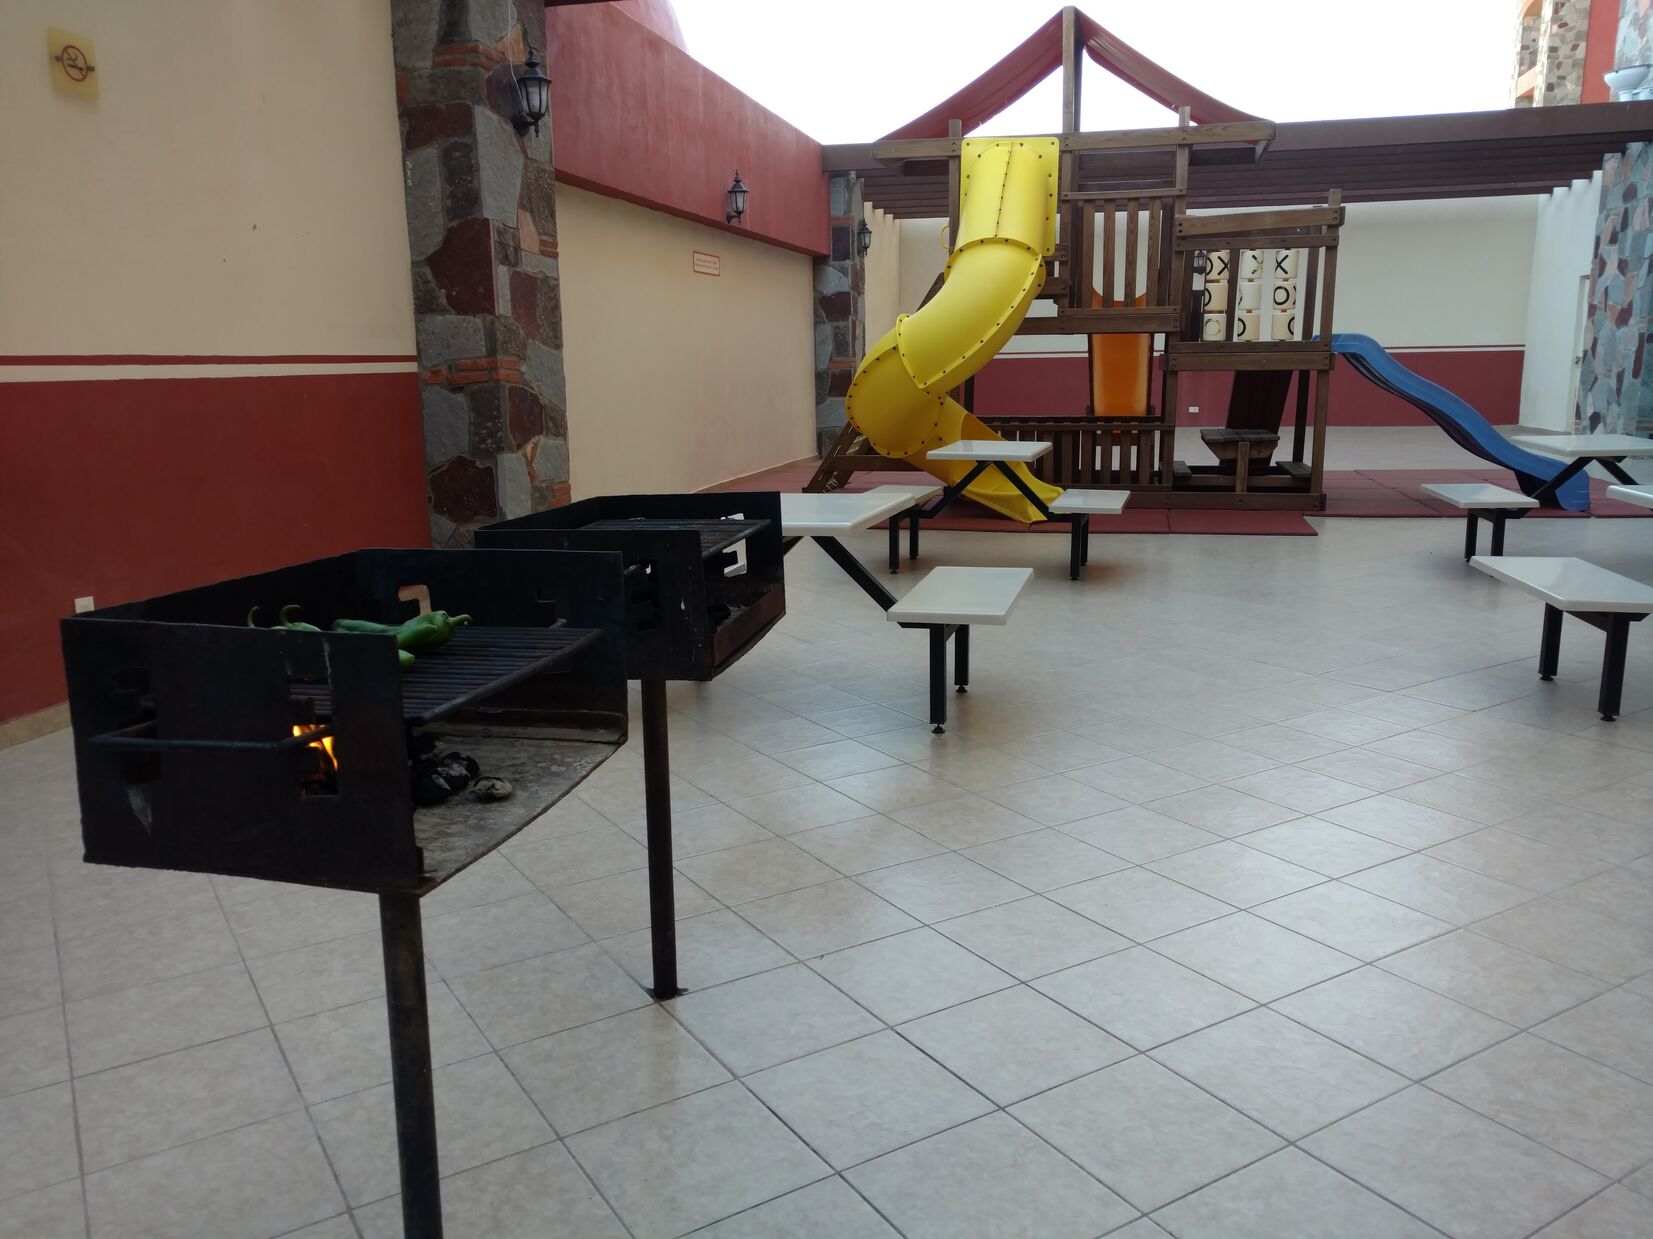 BBQ Grill and Playground